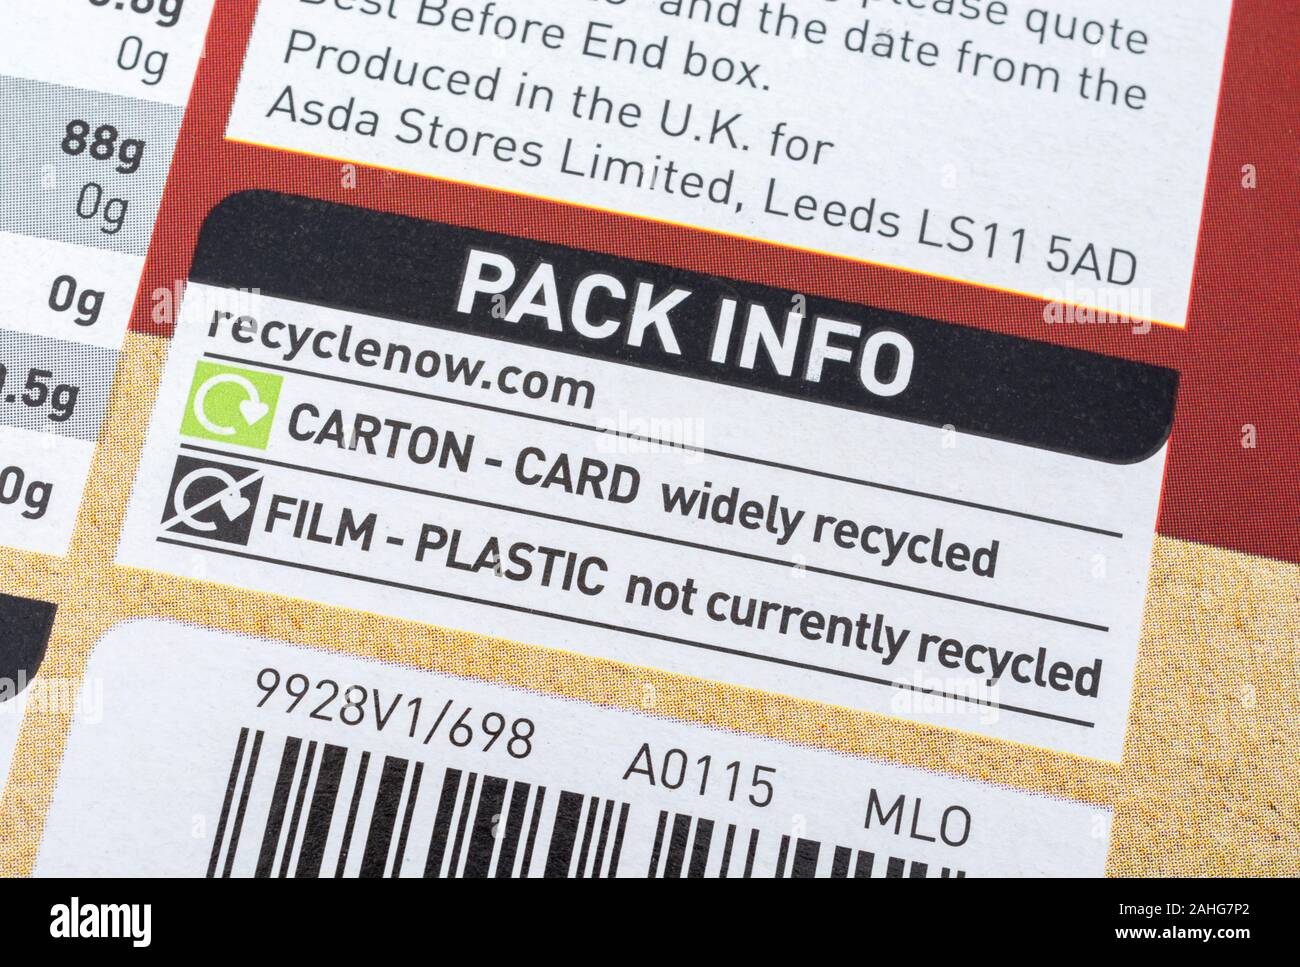 ASDA own-label cornflour / corn starch in cardboard box. For food ingredients labels, widely recycled symbol, recycling info, cardboard food packaging Stock Photo